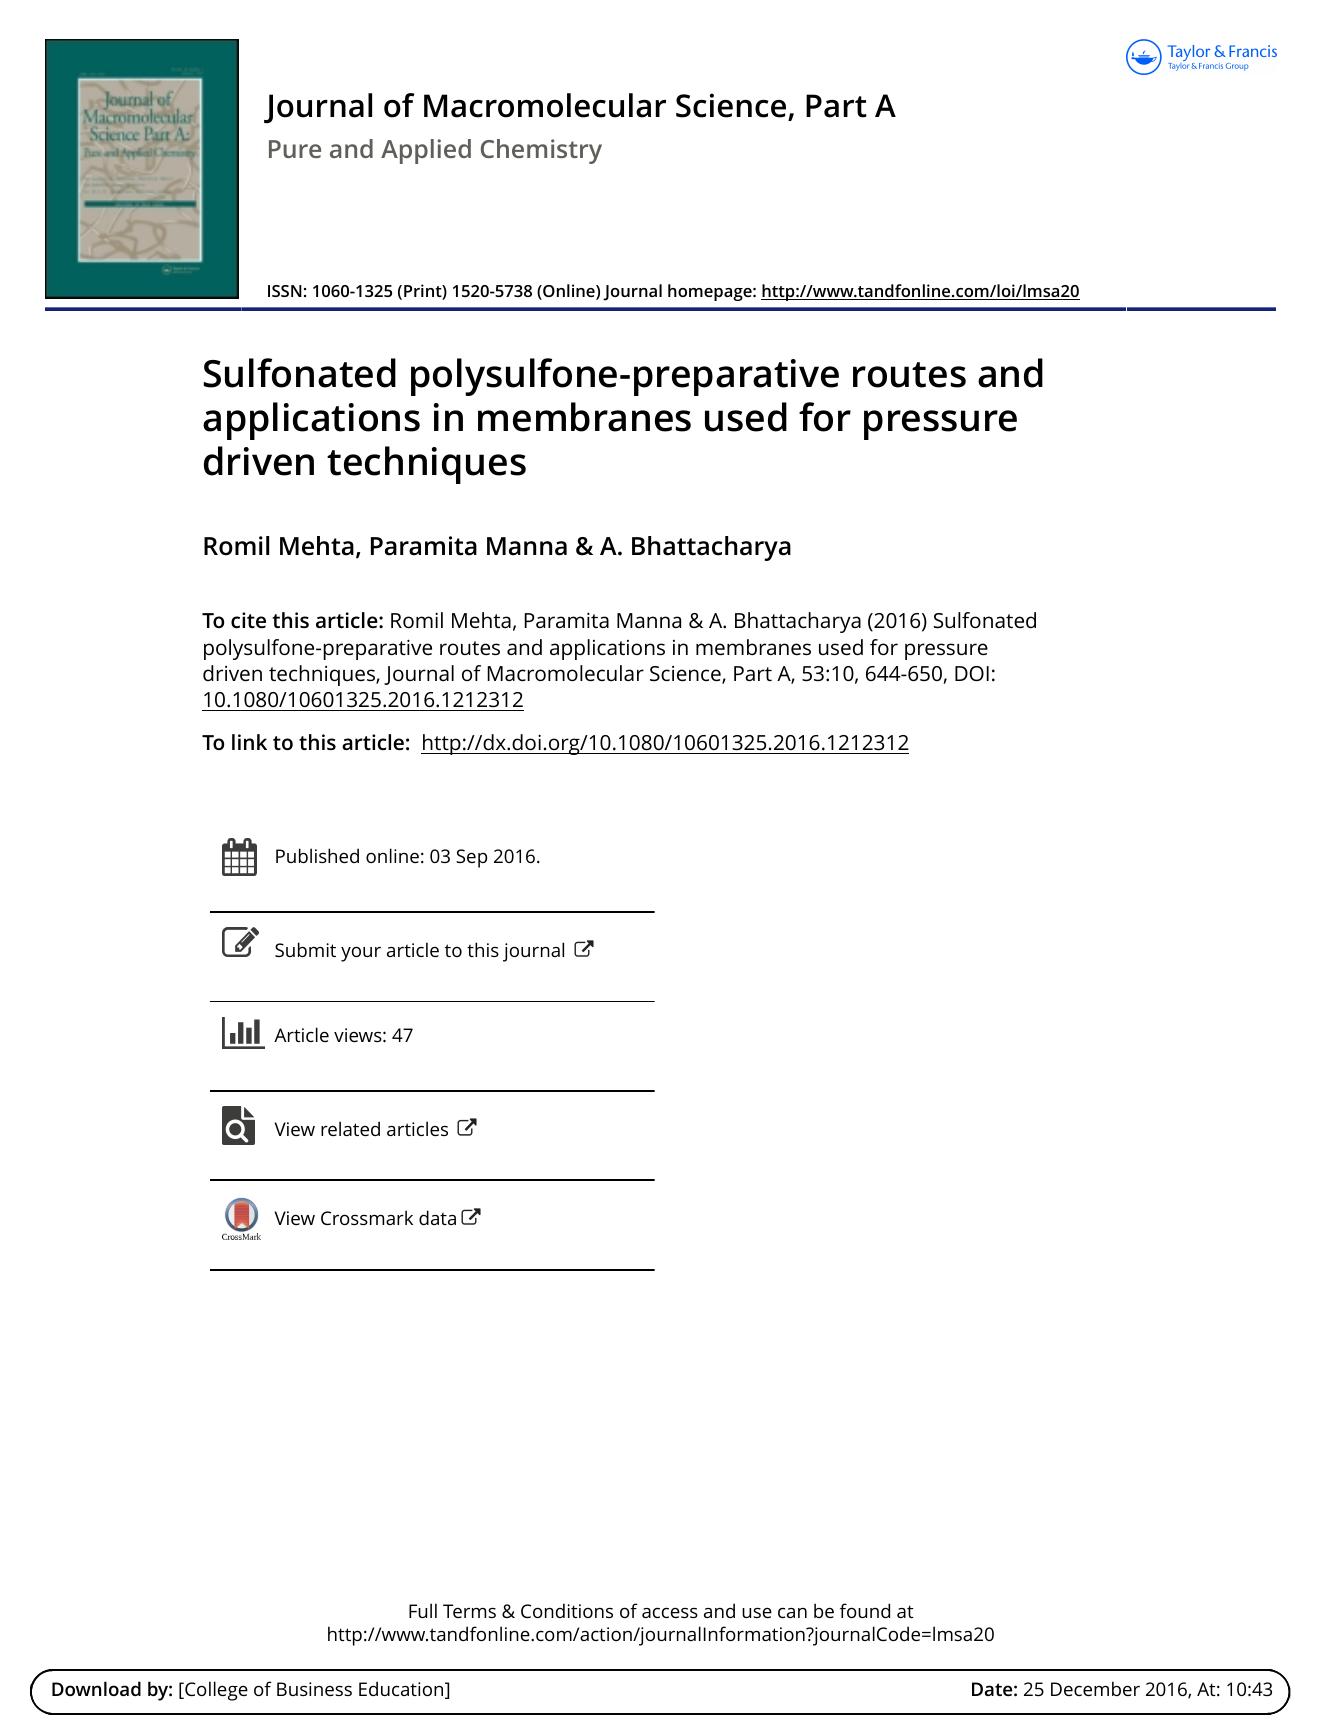 Sulfonated polysulfone-preparative routes and applications in membranes used for pressure driven techniques by Romil Mehta & Paramita Manna & A. Bhattacharya